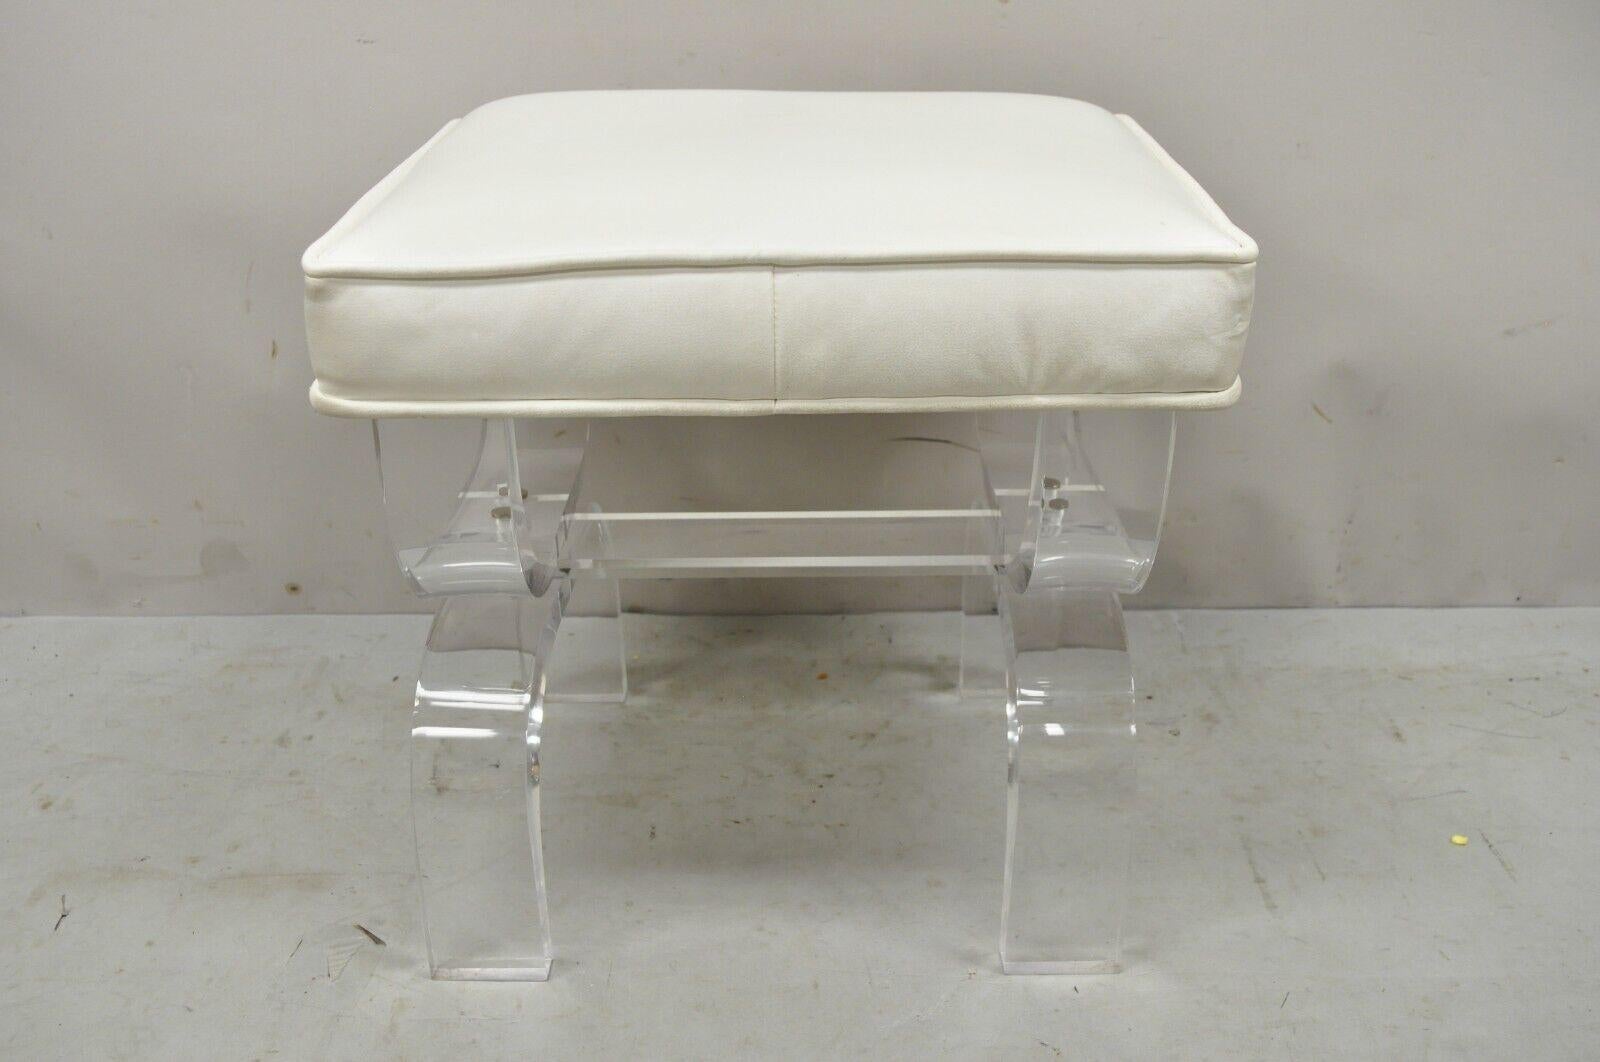 Mid-Century Modern Clear Lucite X-Form Stretcher Base vanity bench. Item features an x-form stretcher base, clear lucite construction, white vinyl seat, clean modernist lines, great style and form. Circa Mid to late 20th Century.
Measurements: 16